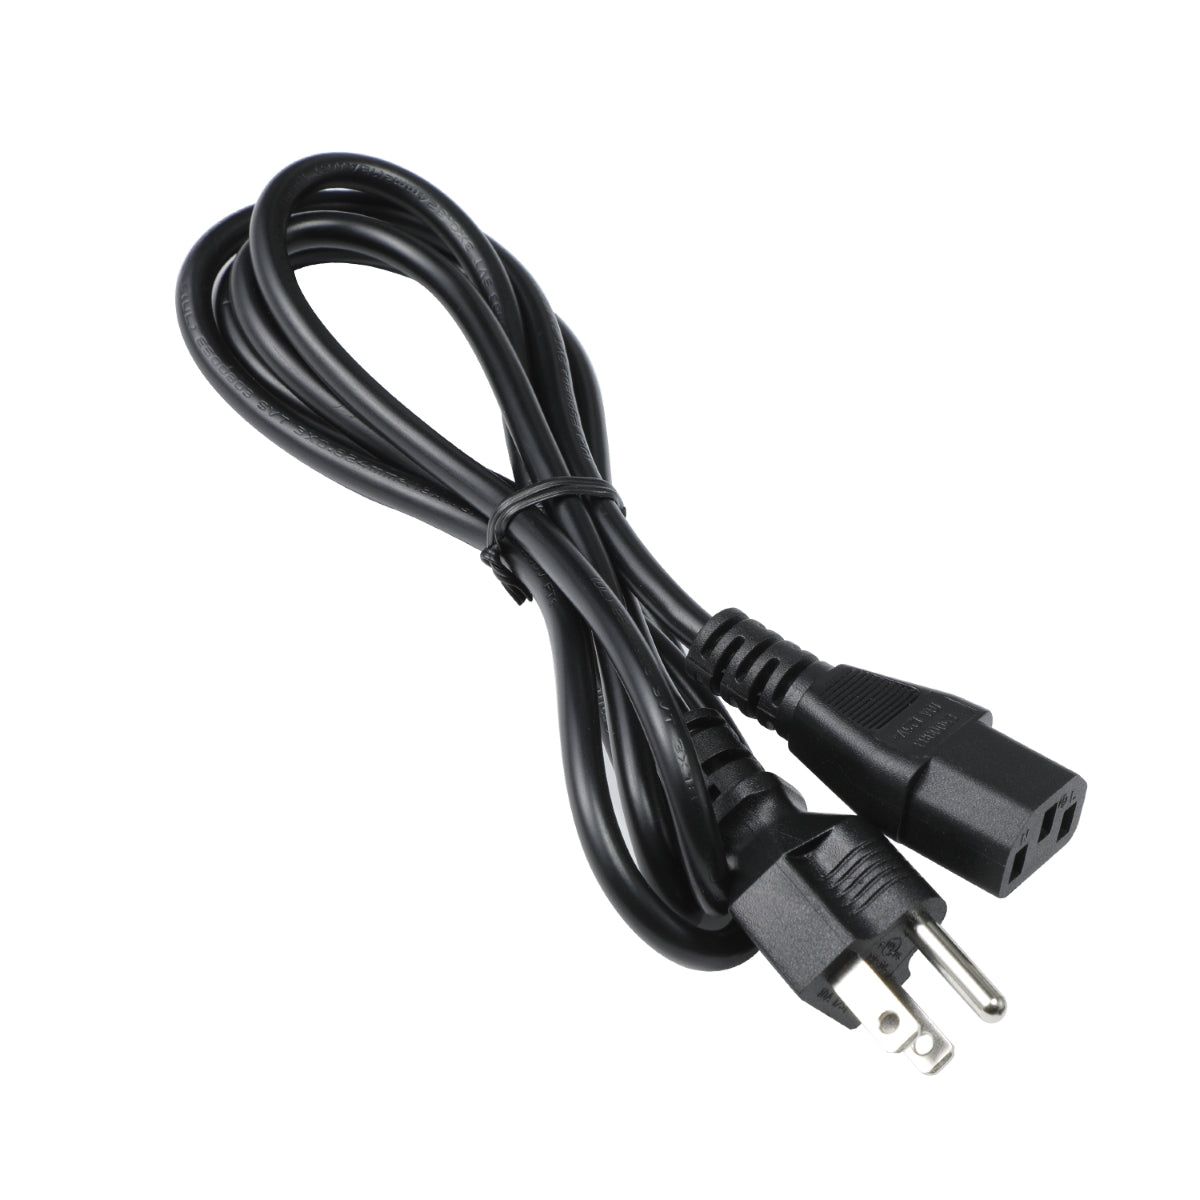 Power Cord for ViewSonic VG2453 Display